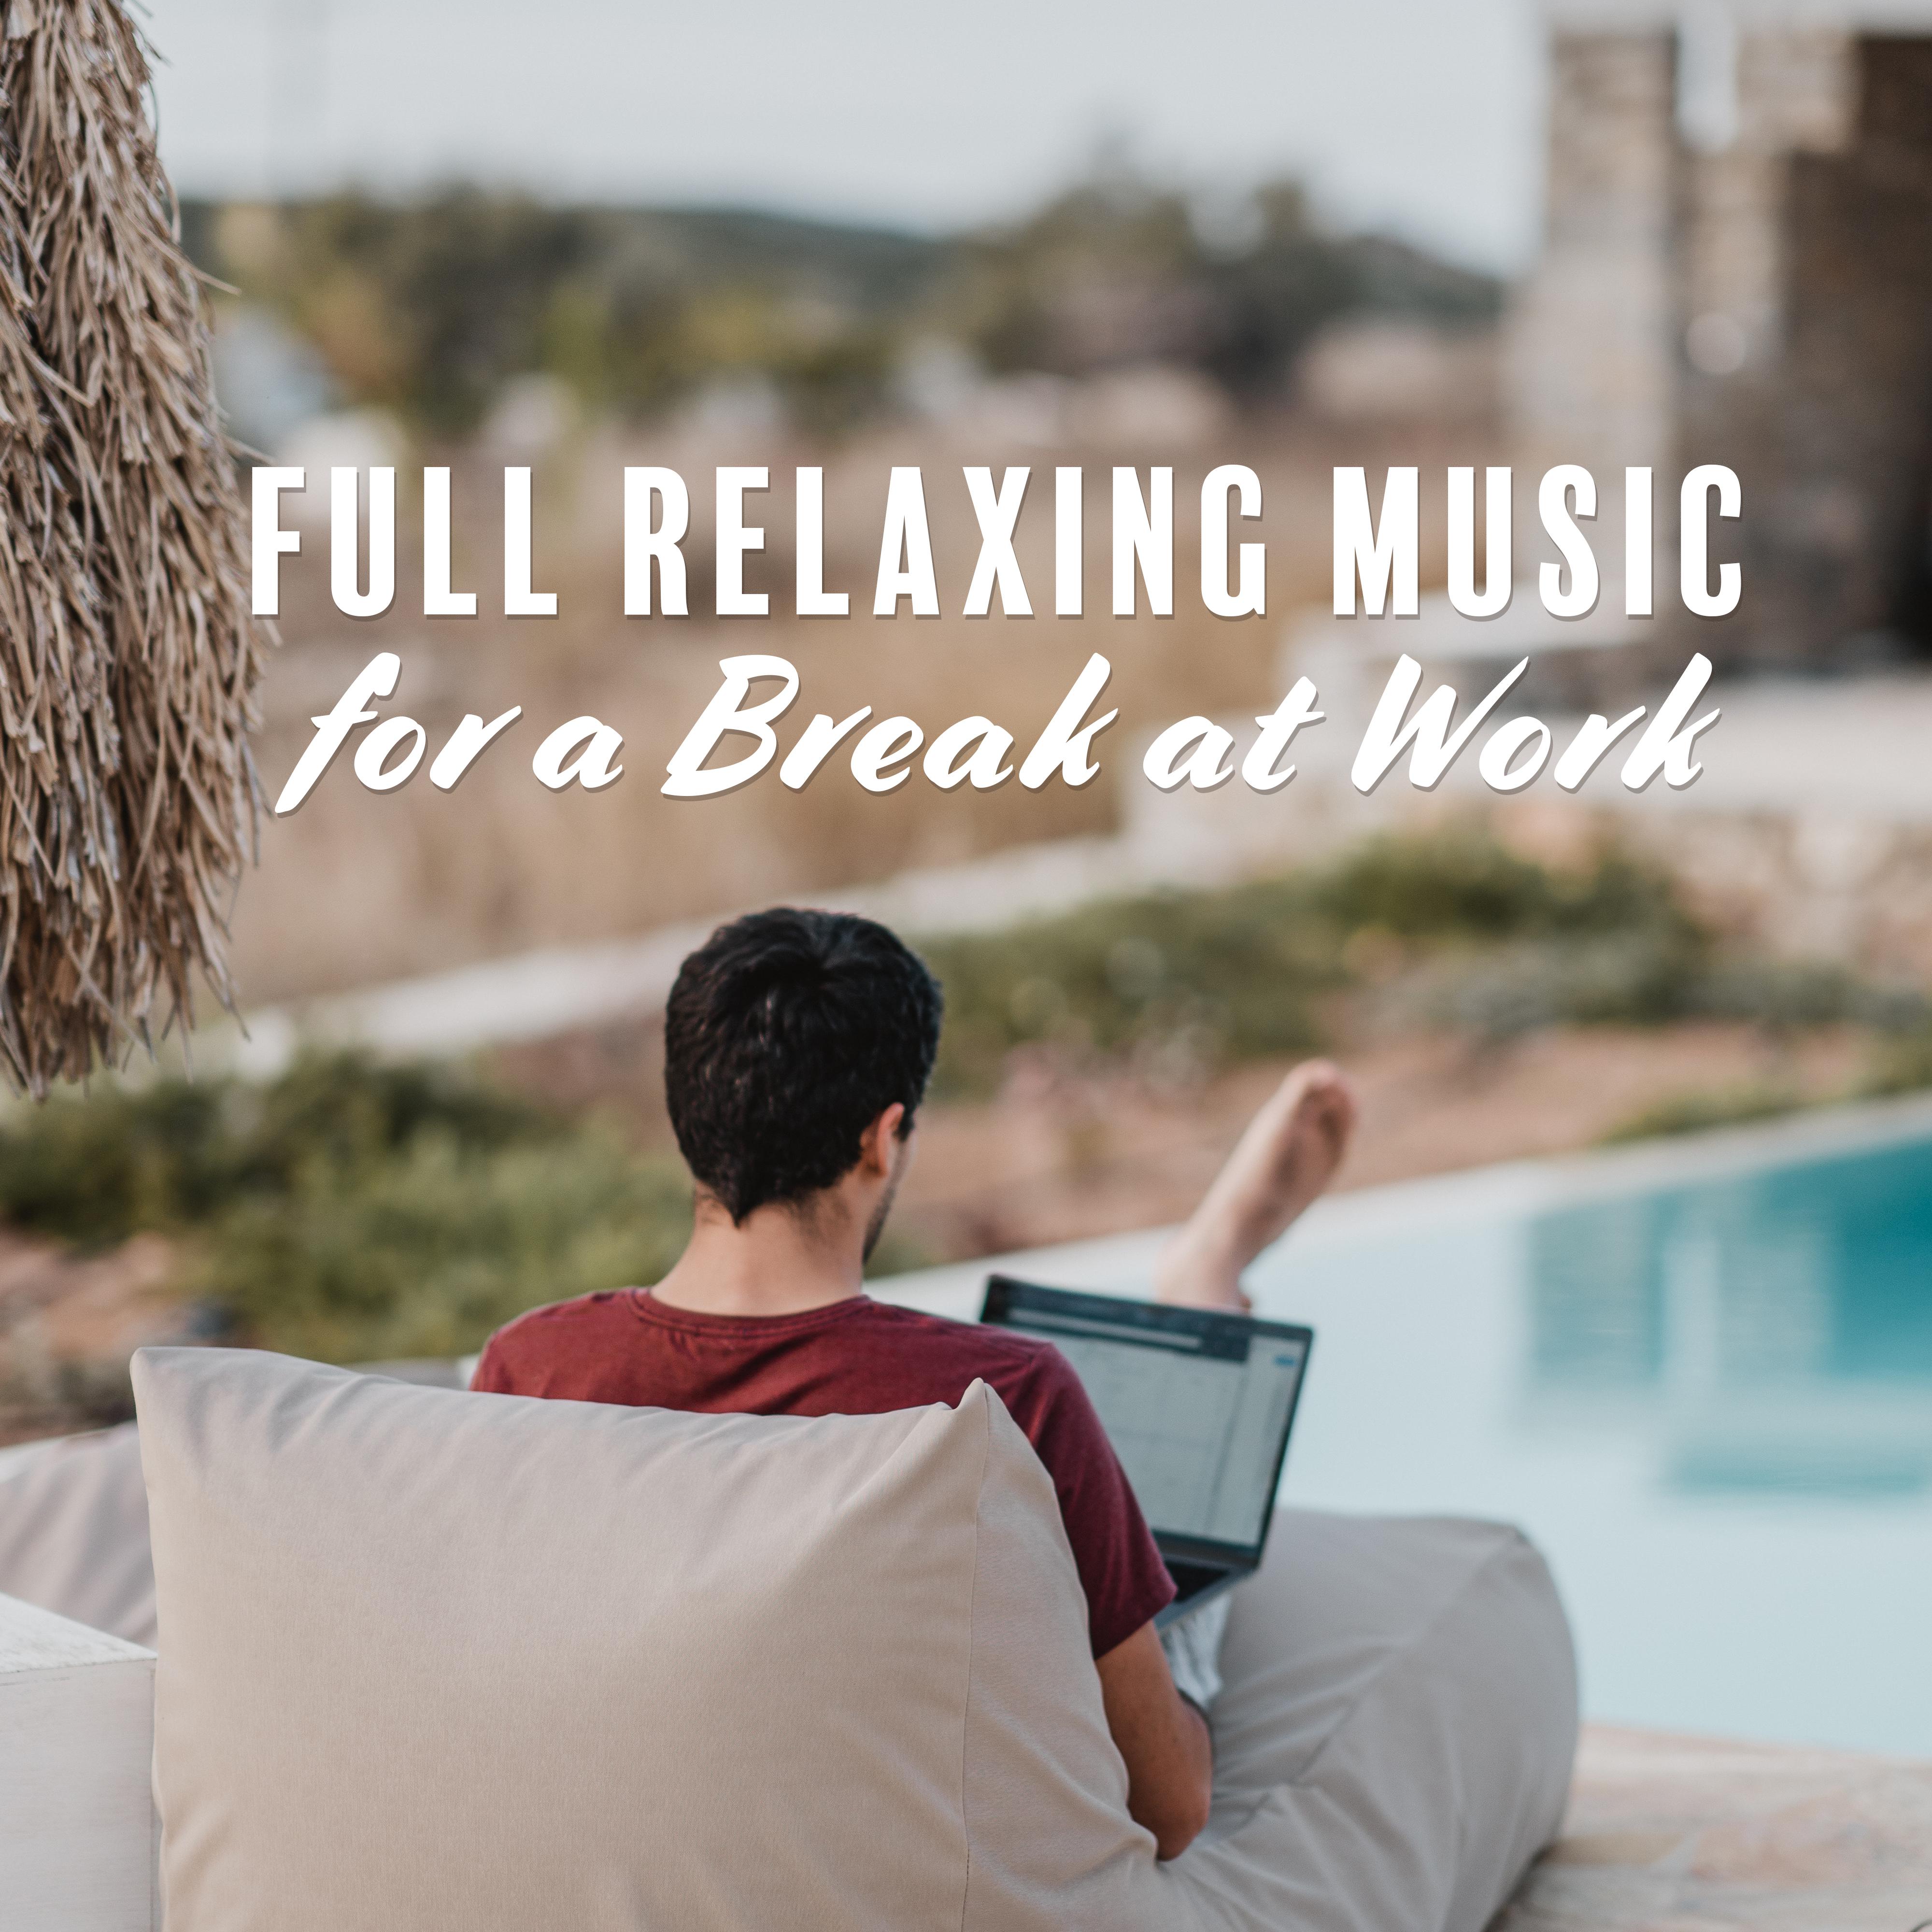 Full Relaxing Music for a Break at Work: New Age Nature Melodies for Calm Down, De-Stress & Restore Your Energy